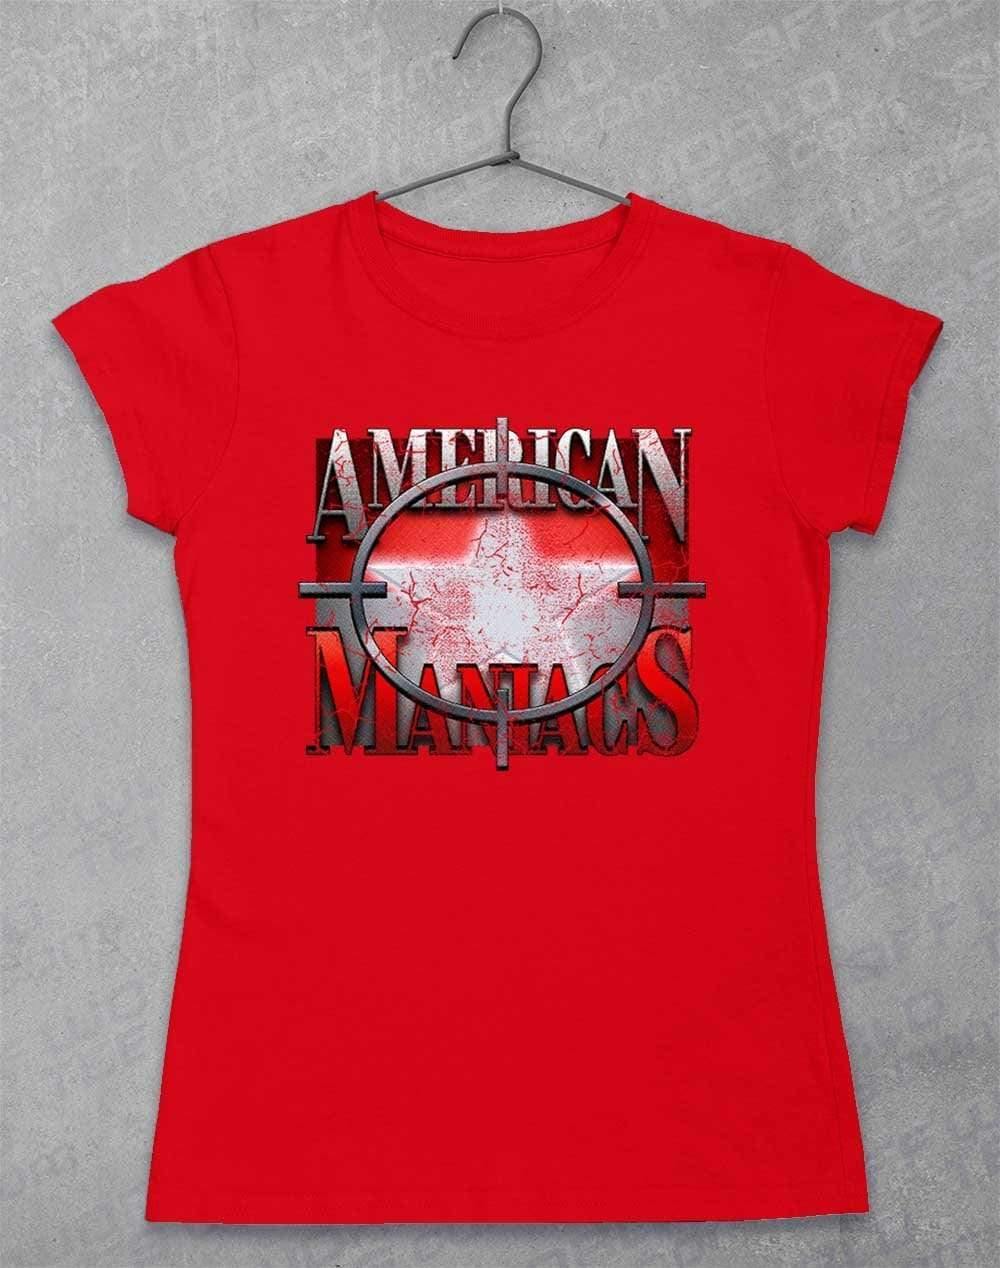 American Maniacs - Womens T-Shirt 8-10 / Red  - Off World Tees